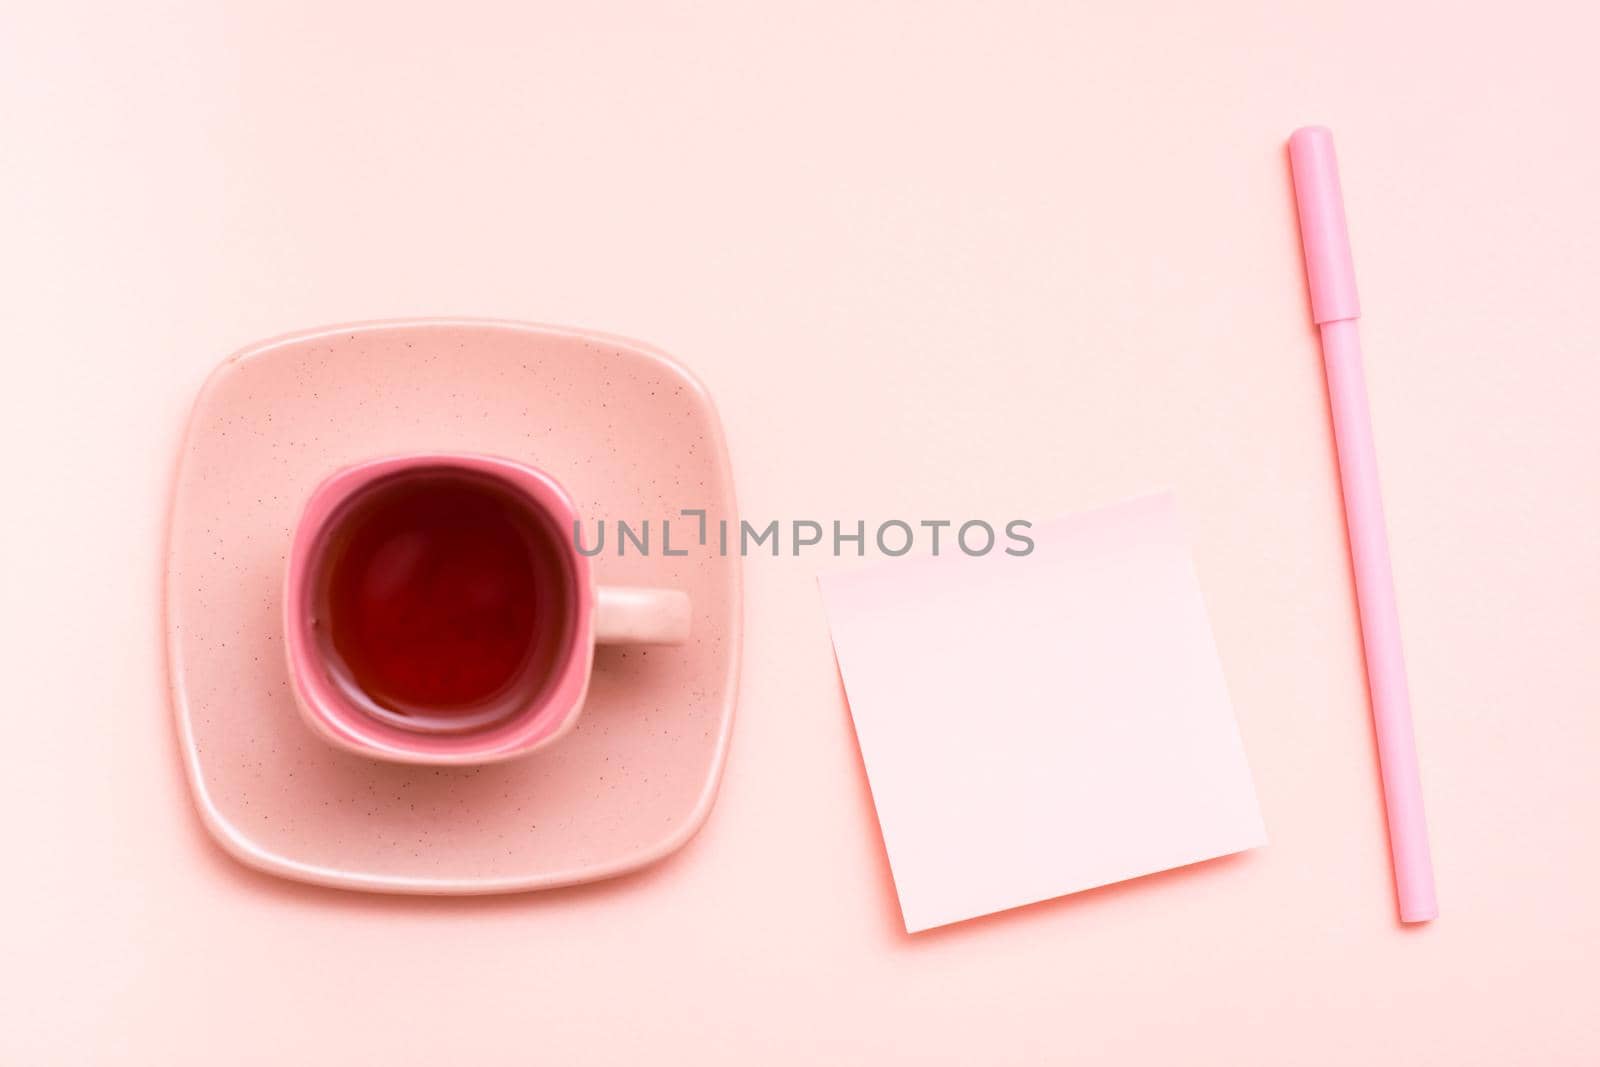 The concept is pink. Pink drink in a coffee cup, writing sheet and pen on a pink background. Top view by Aleruana